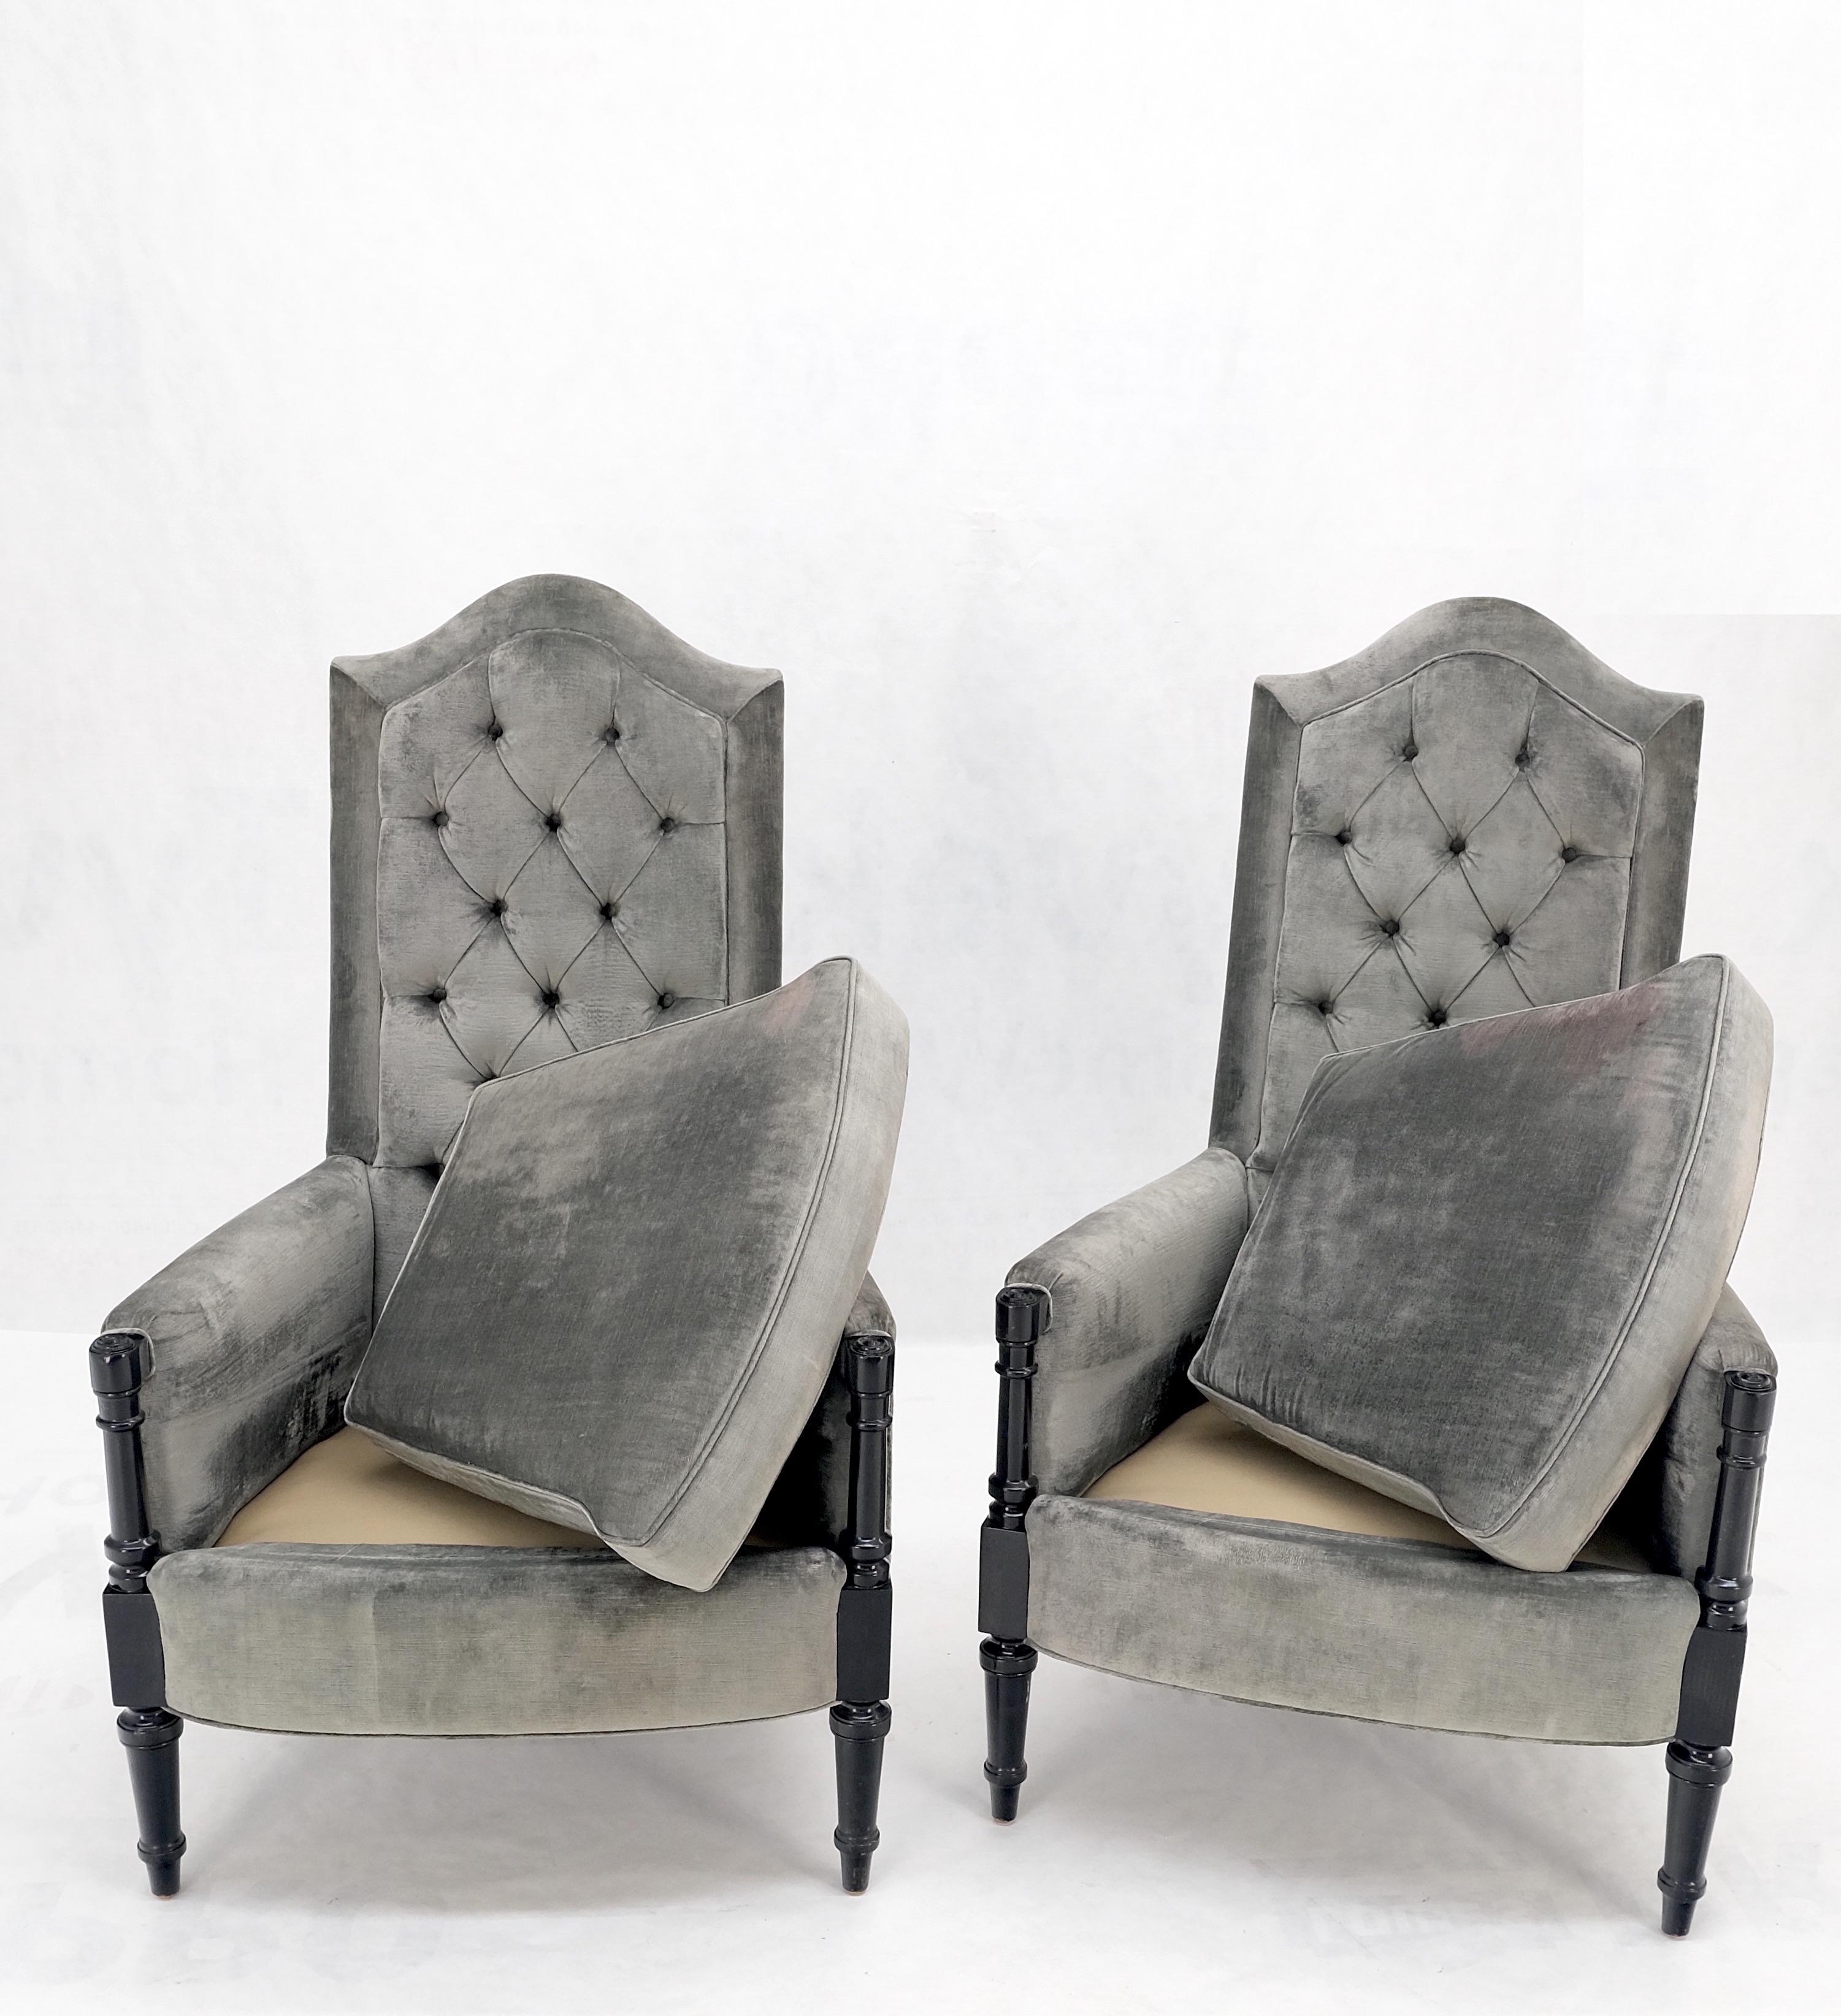 Pair of tall tufted backs black lacquer frames decorative arm chairs thrones.
Super high quality slight fading in the upholstery as pictured.